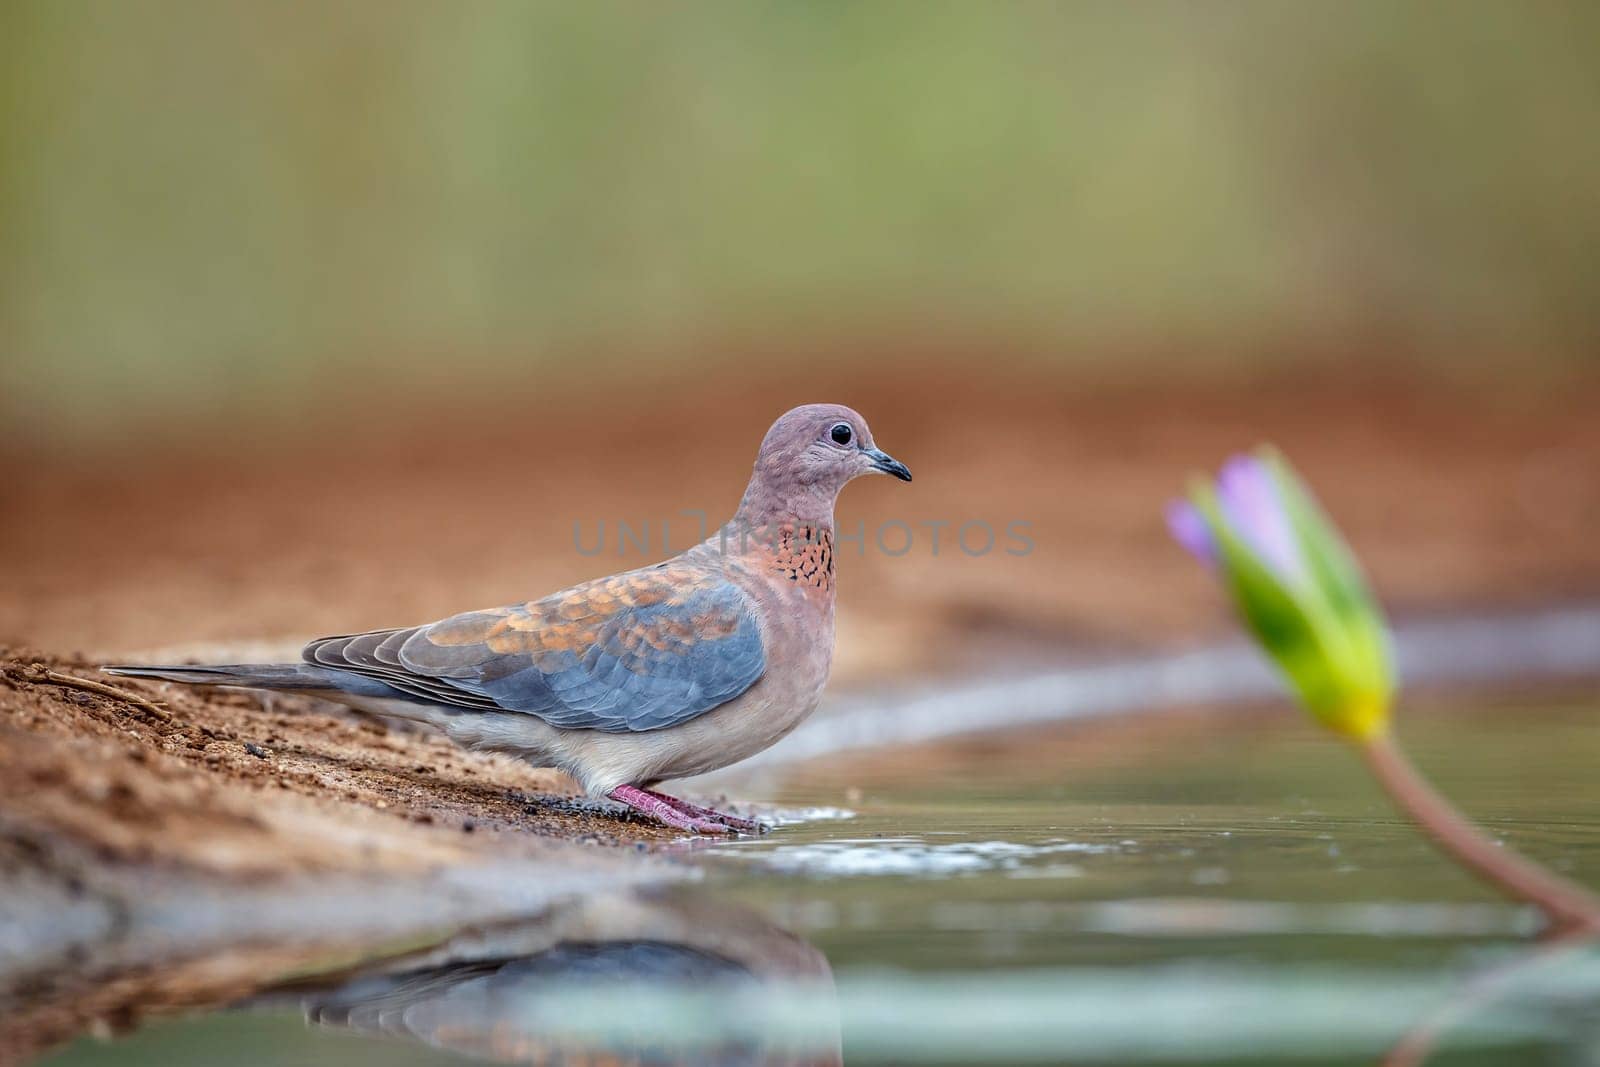 Laughing Dove along waterhole in Kruger National park, South Africa ; Specie Streptopelia senegalensis family of Columbidae